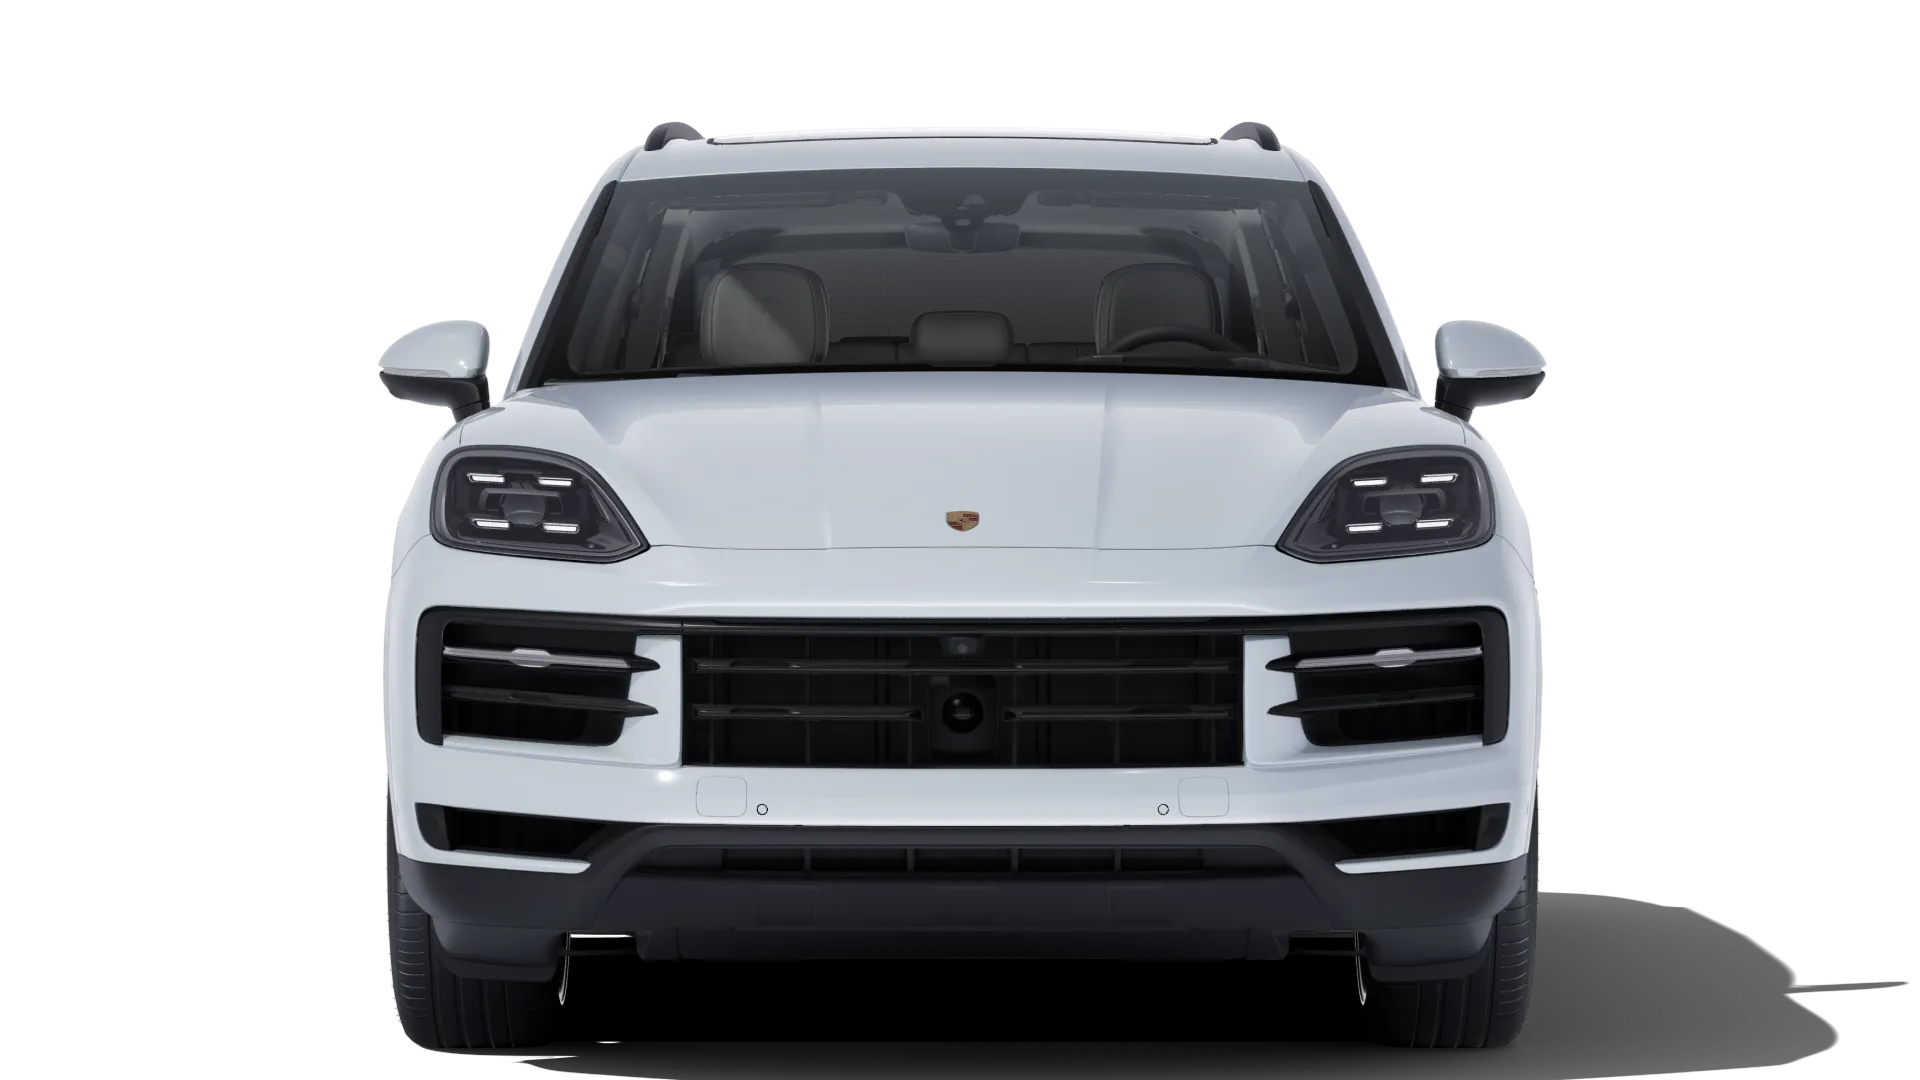 Exterior view of The New Cayenne